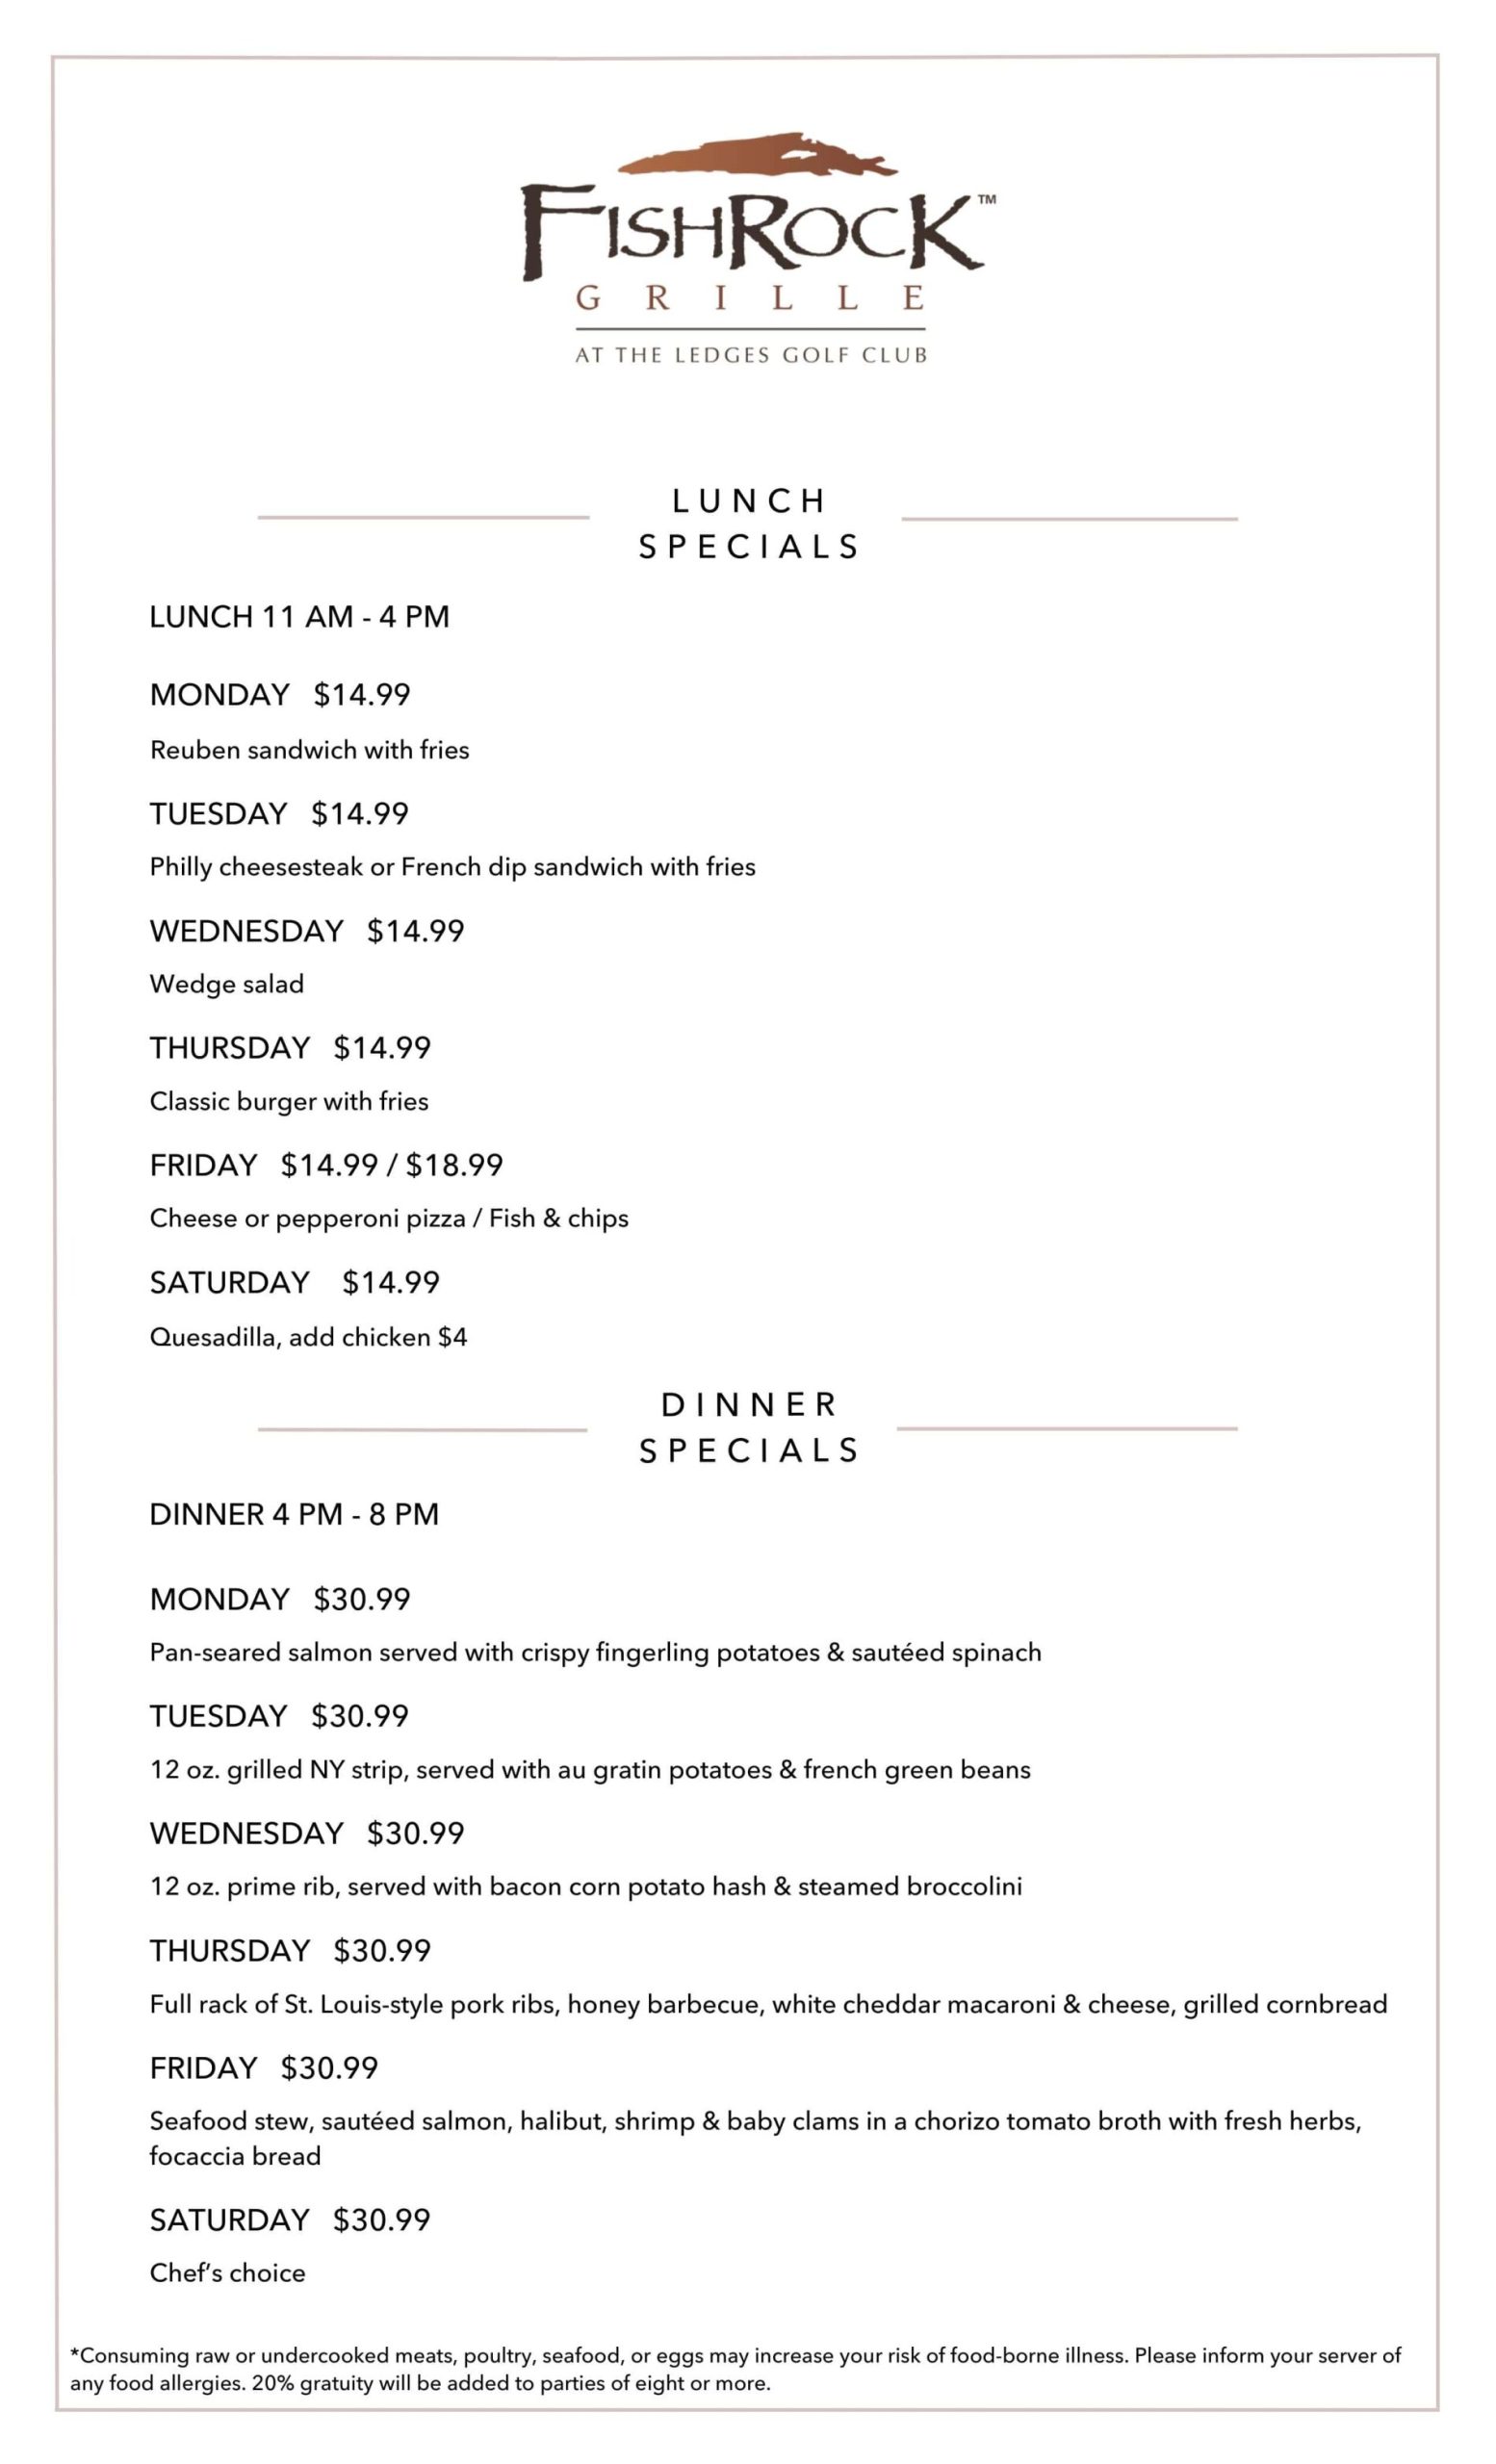 Lunch and Dinner specials